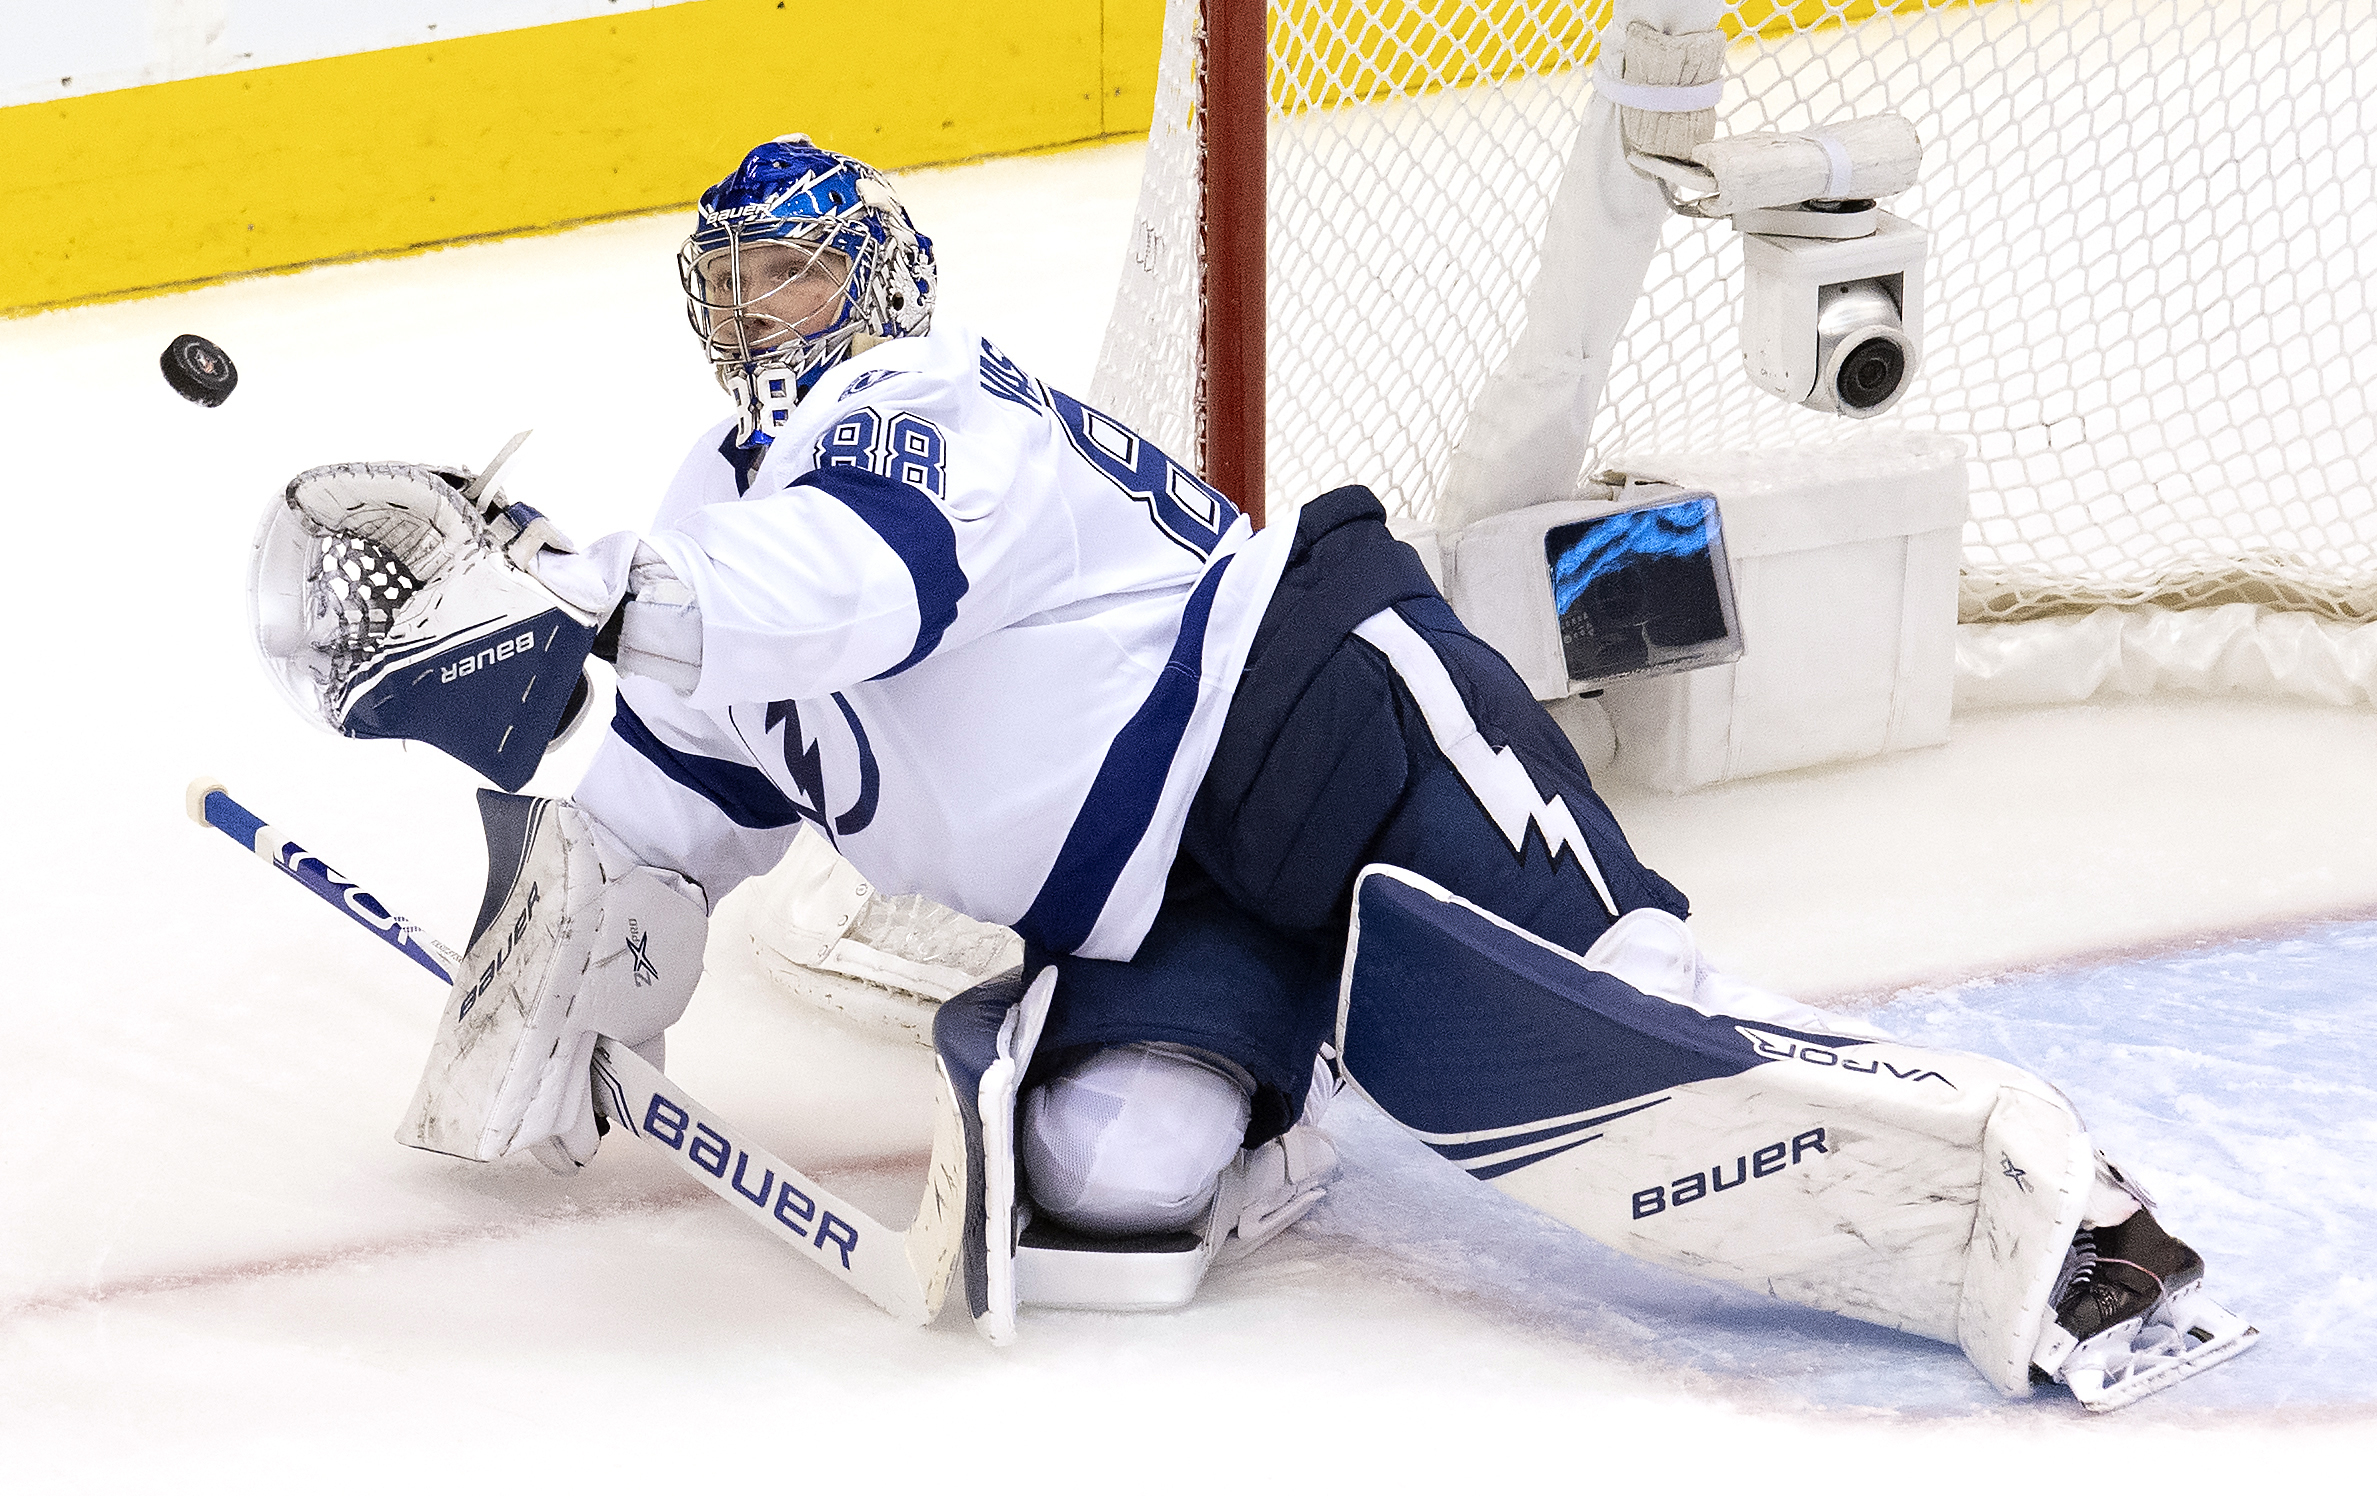 Novemebr 10, 2015: Tampa Bay Lightning goalie Andrei Vasilevskiy #88  stretches to get to the puck for the save in the 2nd period in the game  between the Tampa Bay Lightning 